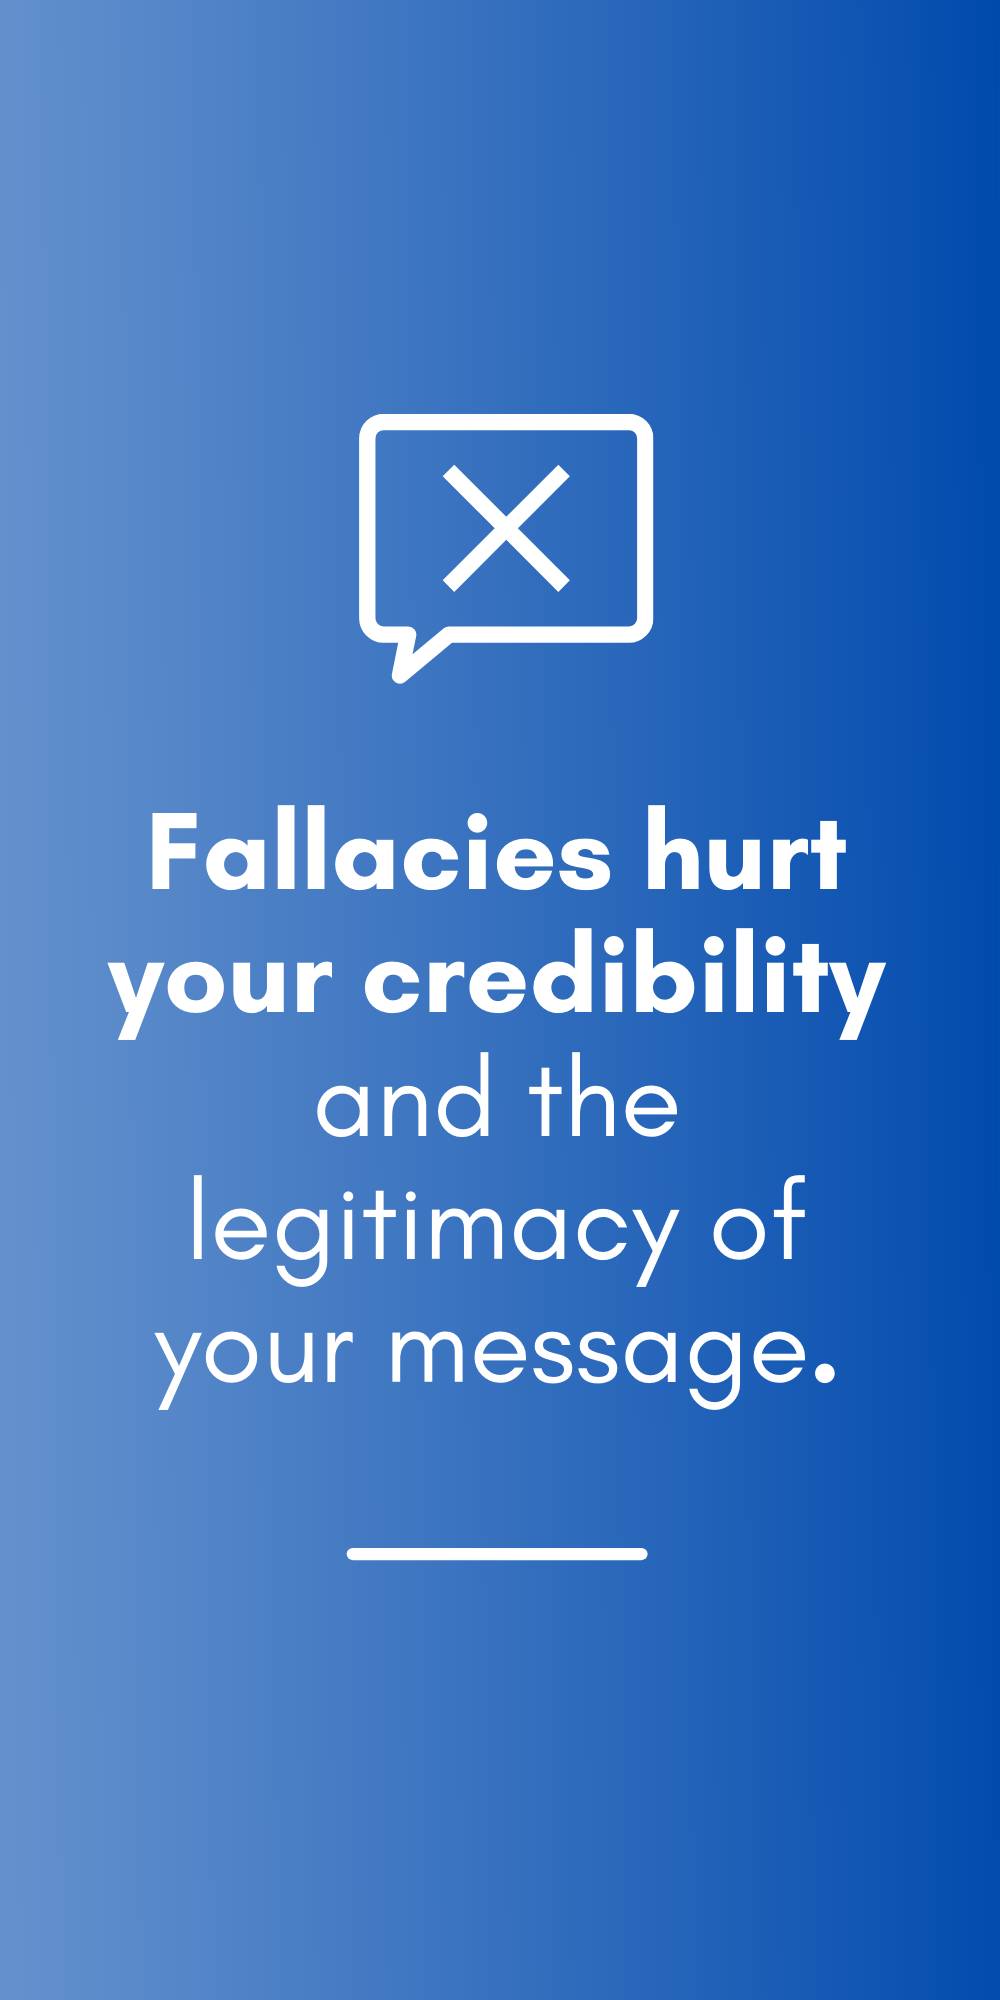 Fallacies hurt your credibility and the legitimacy of your message.